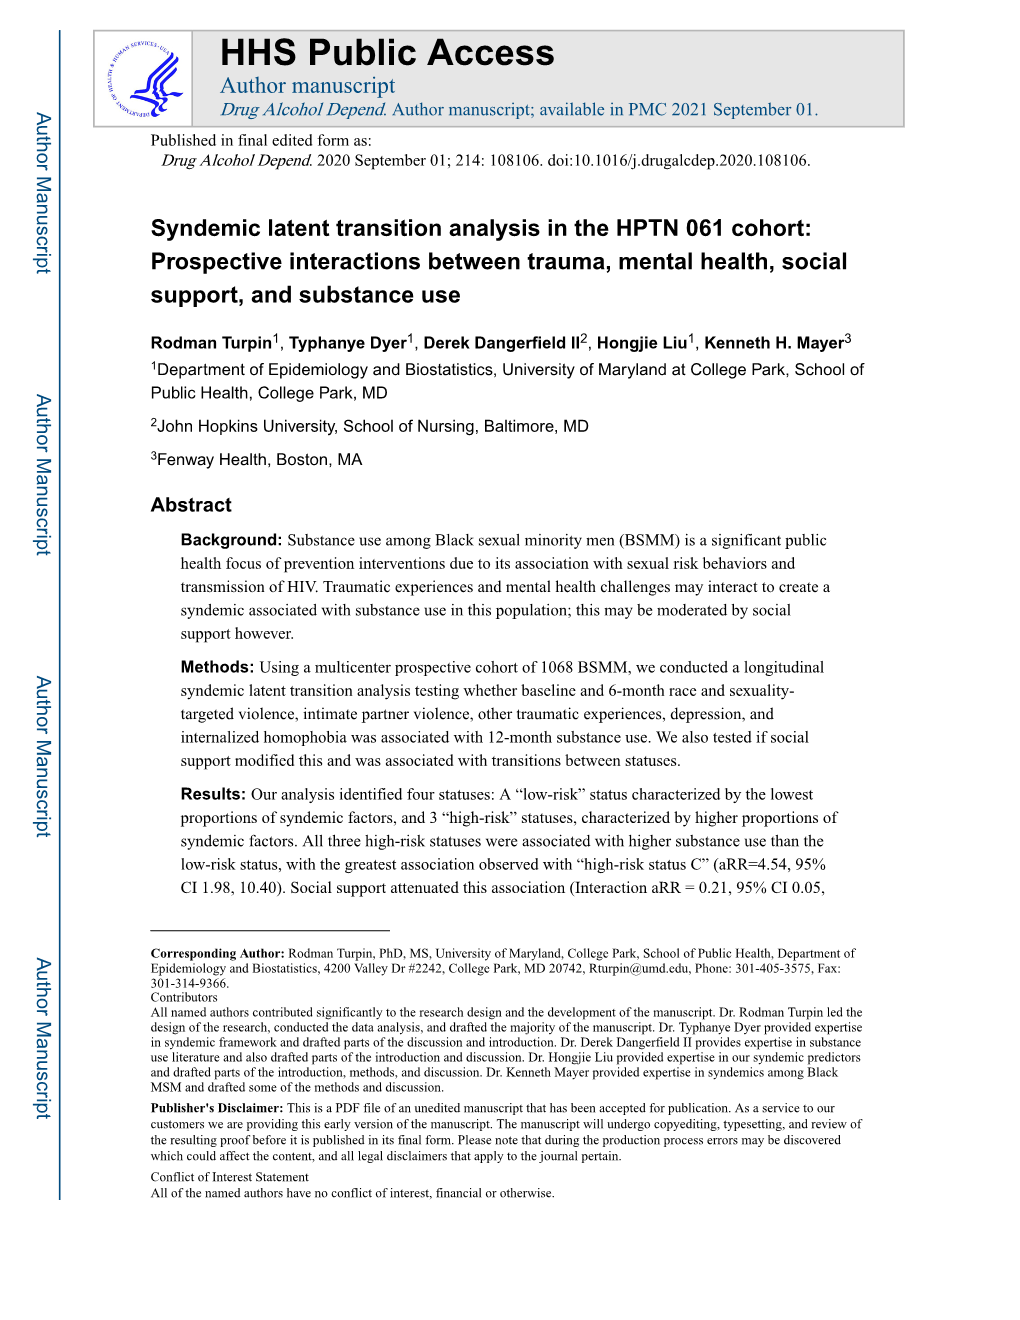 Syndemic Latent Transition Analysis in the HPTN 061 Cohort: Prospective Interactions Between Trauma, Mental Health, Social Support, and Substance Use